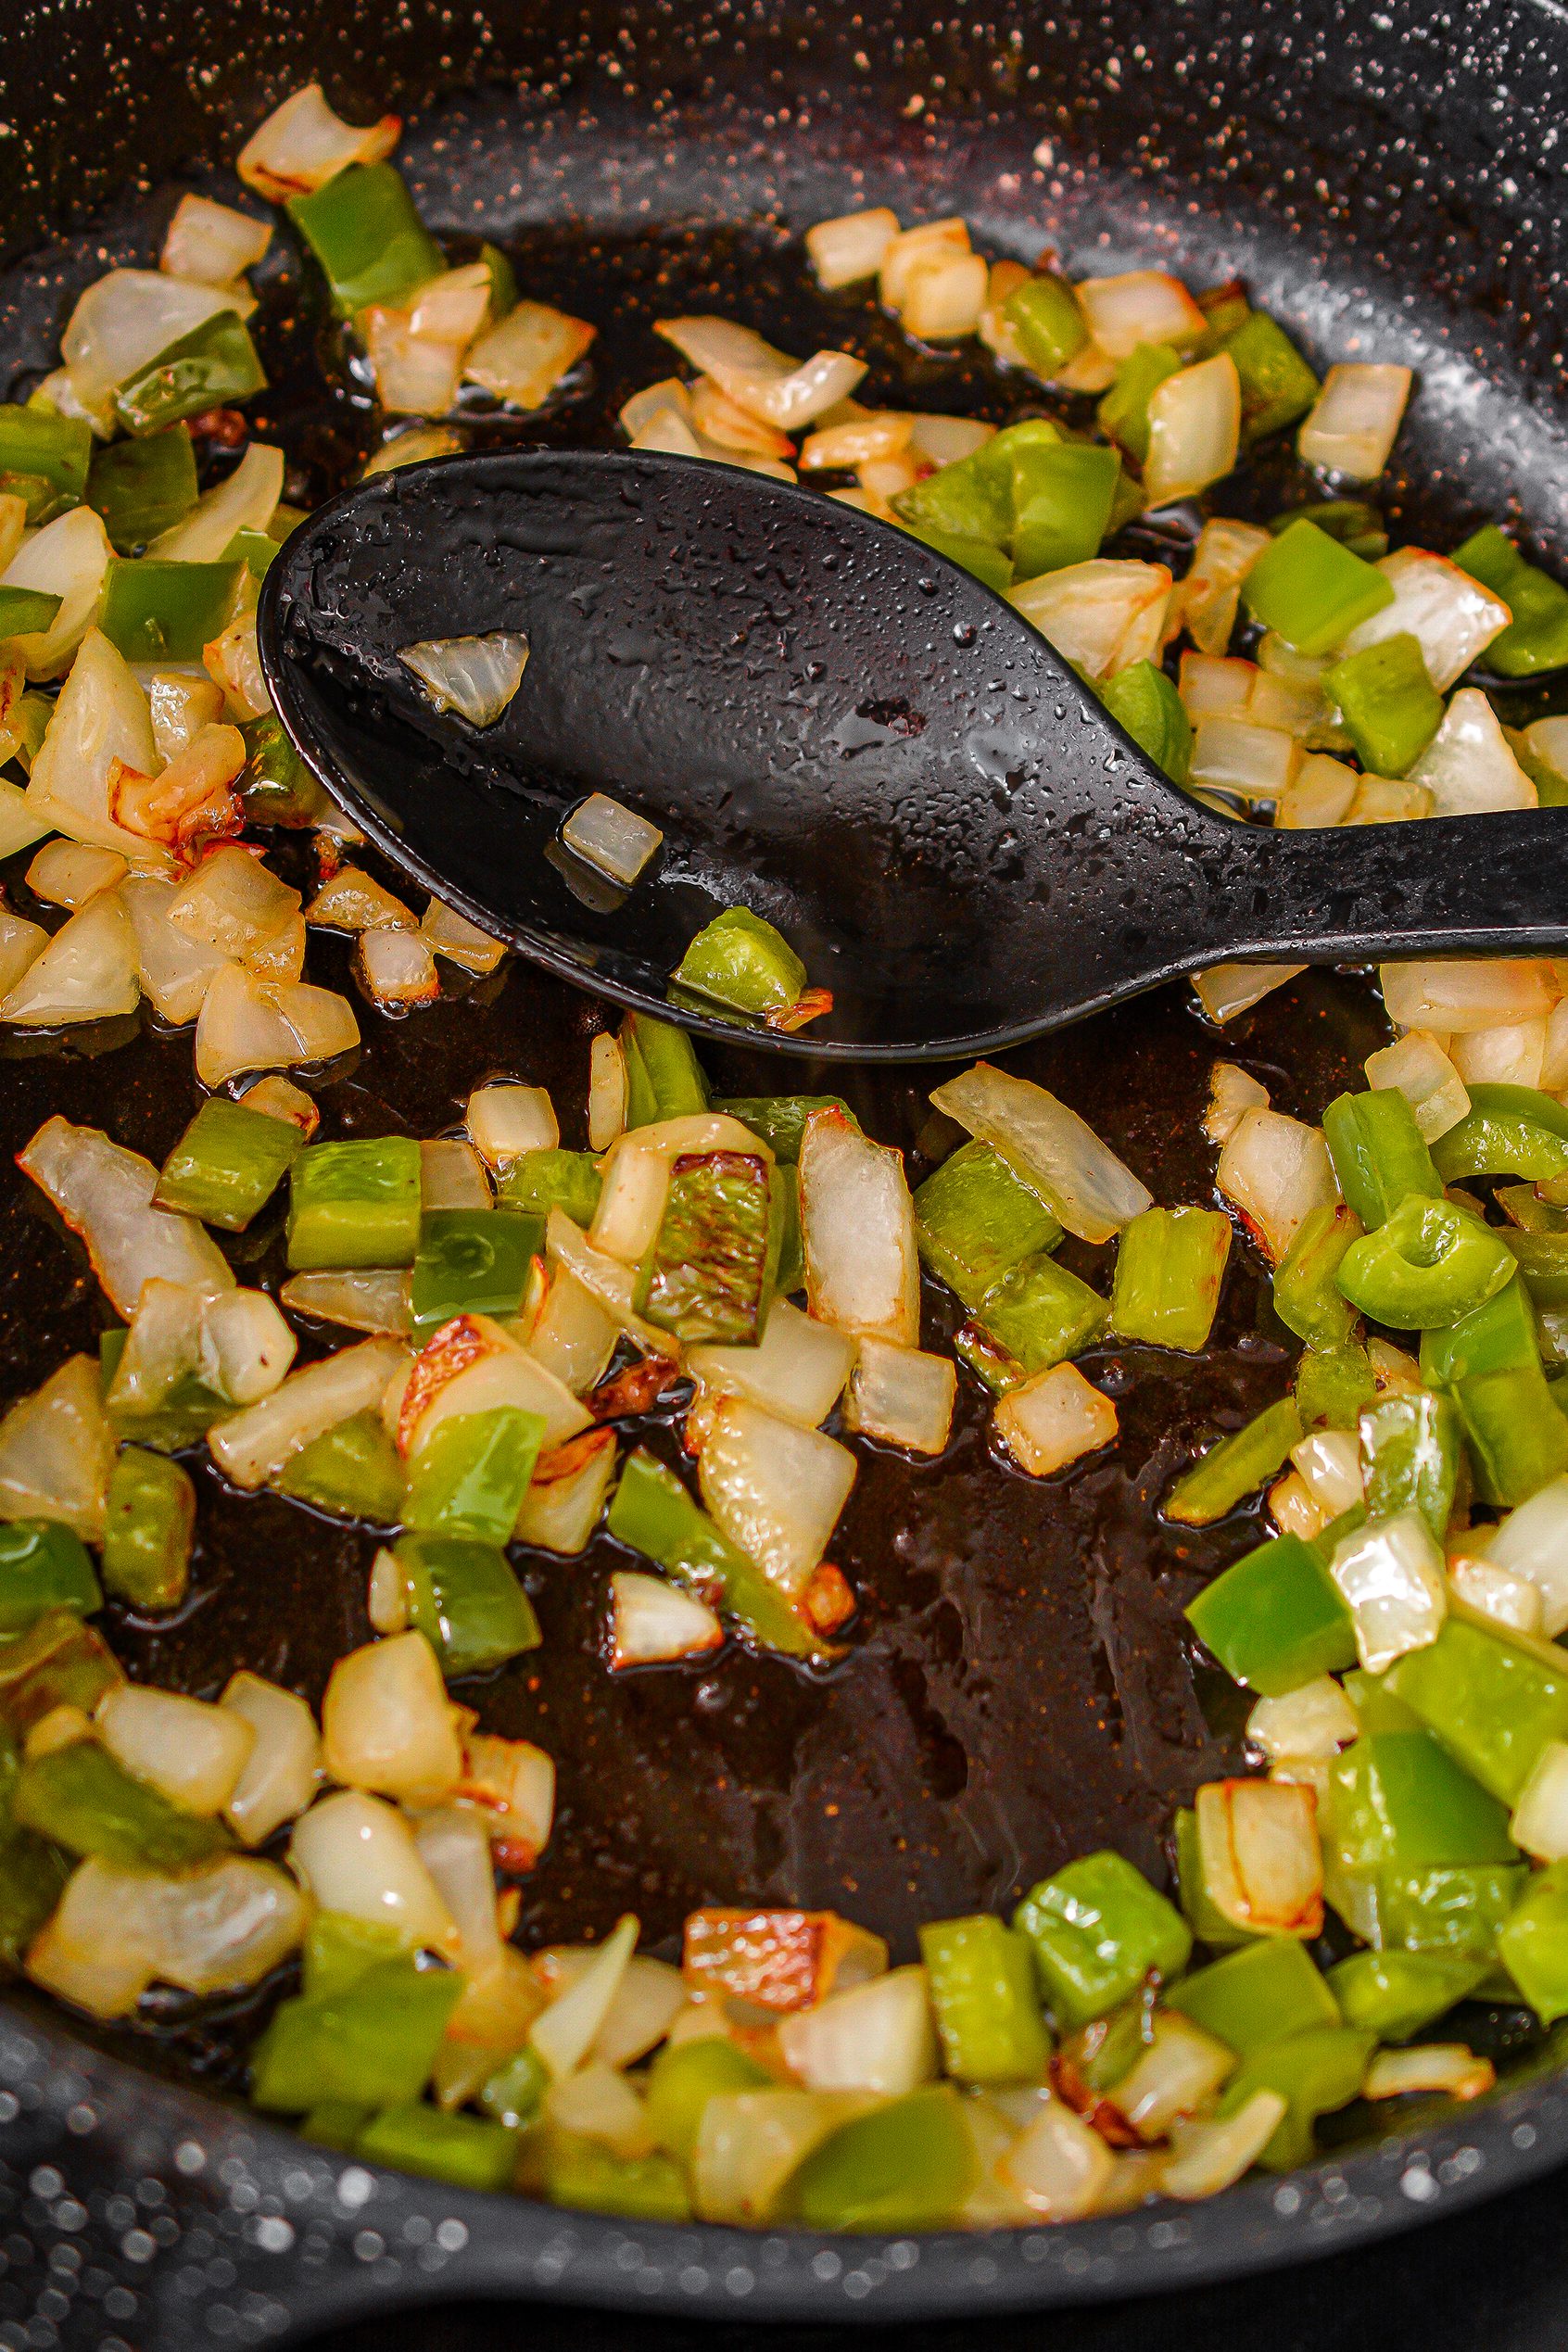 Add the butter, onion, and pepper to the skillet and cook until they begin to soften.